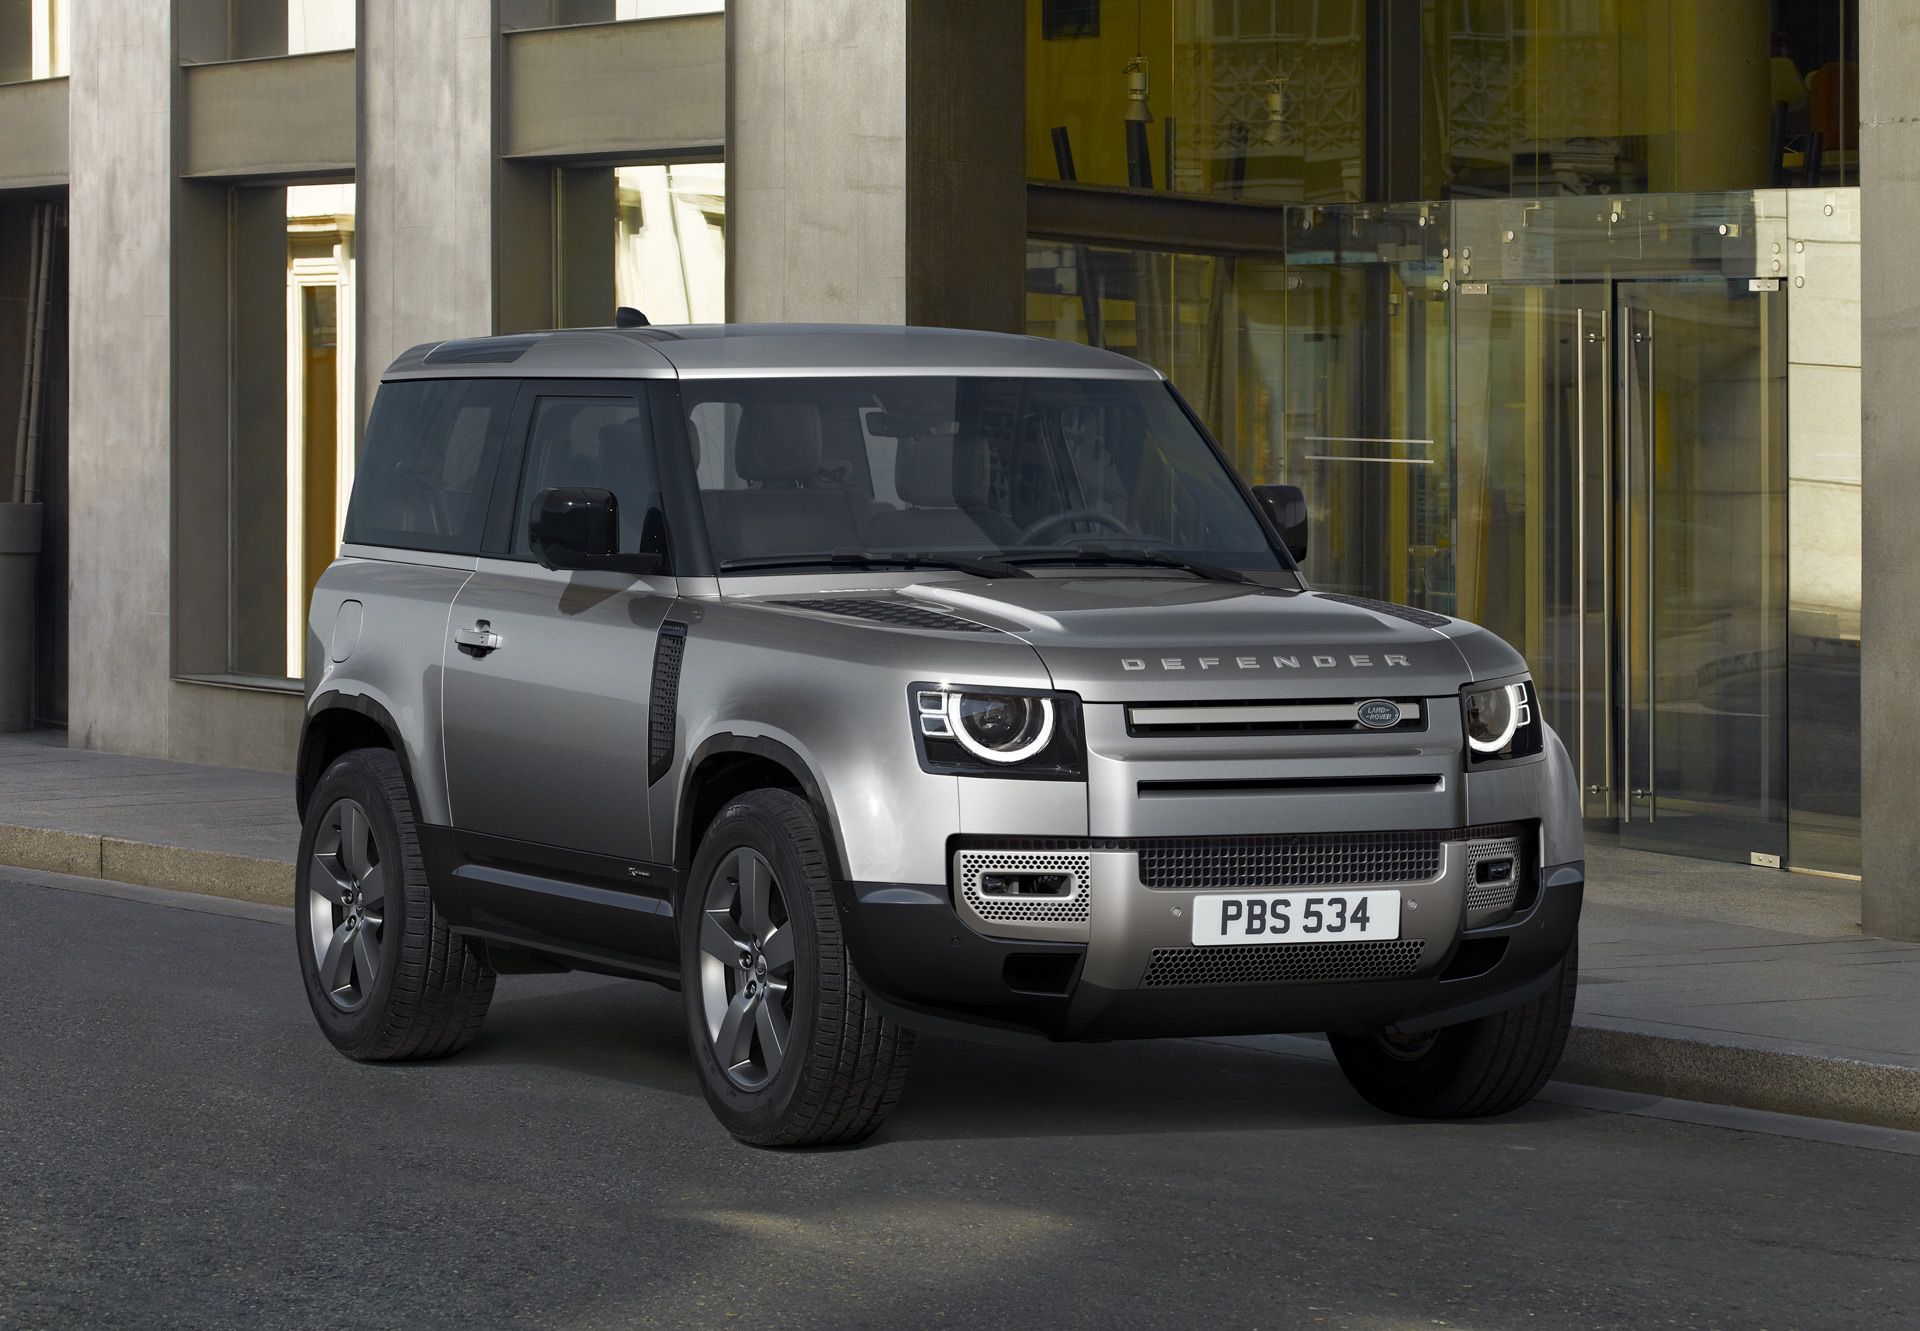 2021 Land Rover Defender announced with new XDynamic grade, 2door